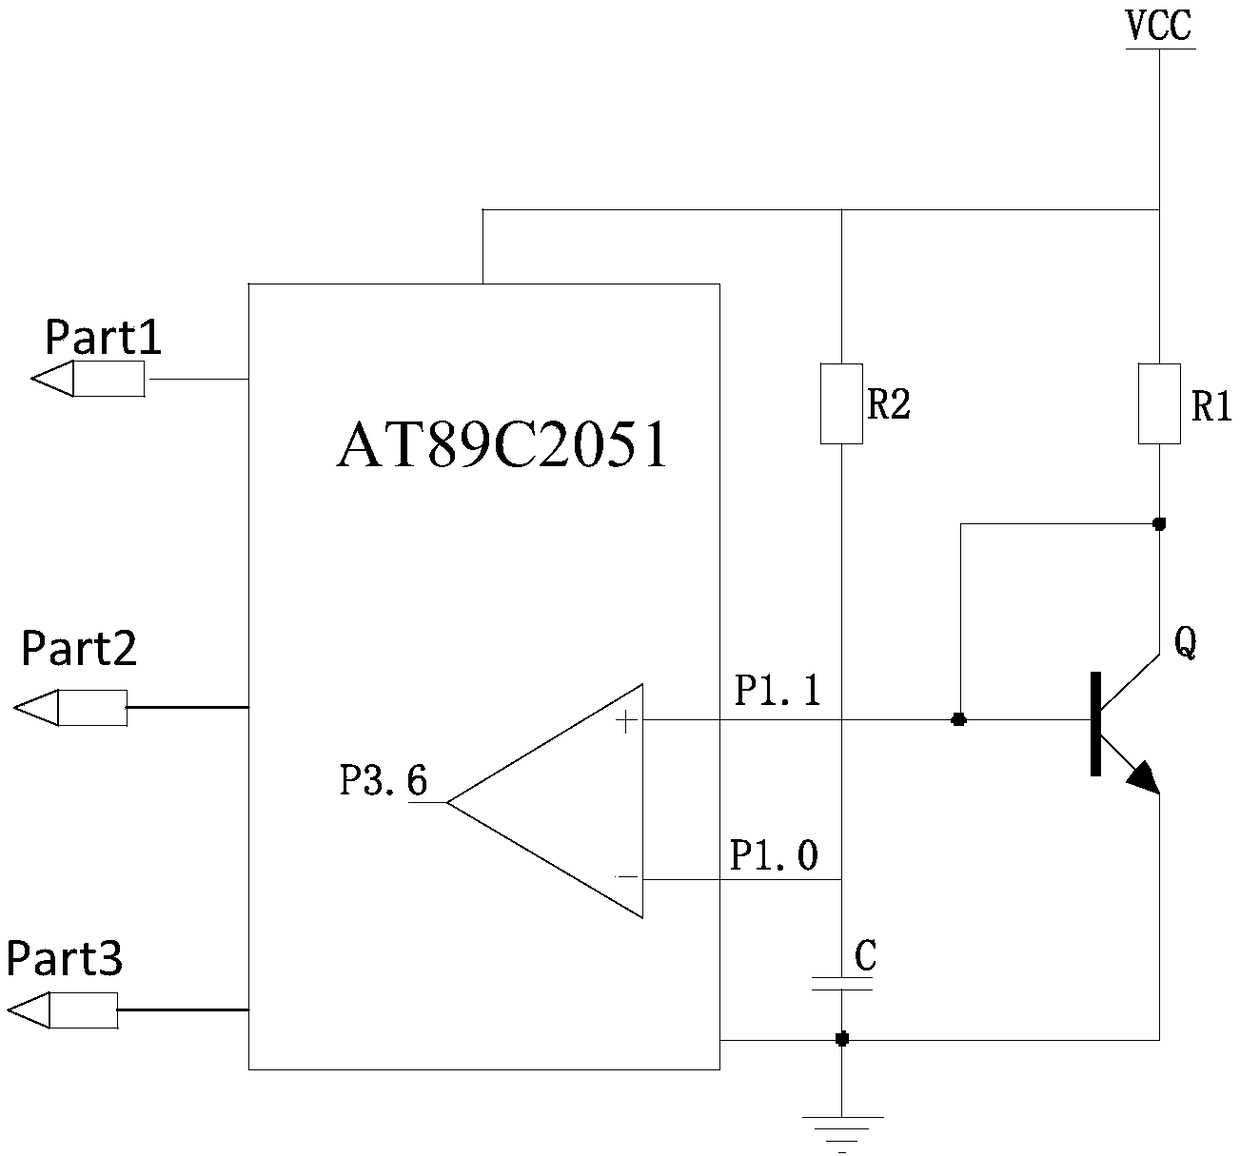 Fault arc monitoring system of low voltage electrical circuit